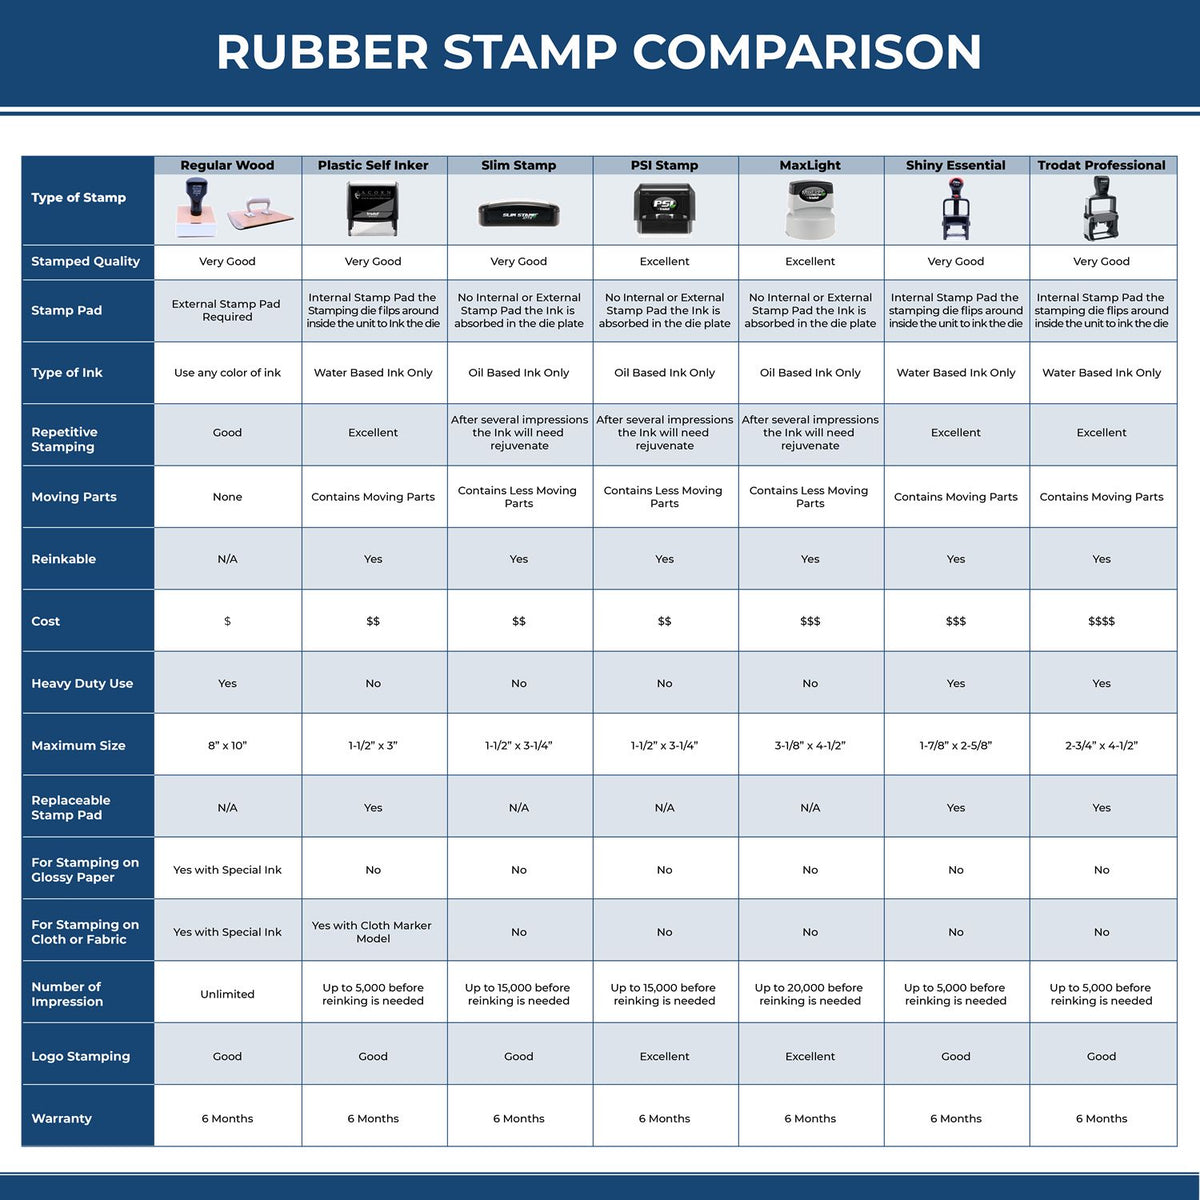 A comparison chart for the different types of mount models available for the Florida Professional Engineer Seal Stamp.